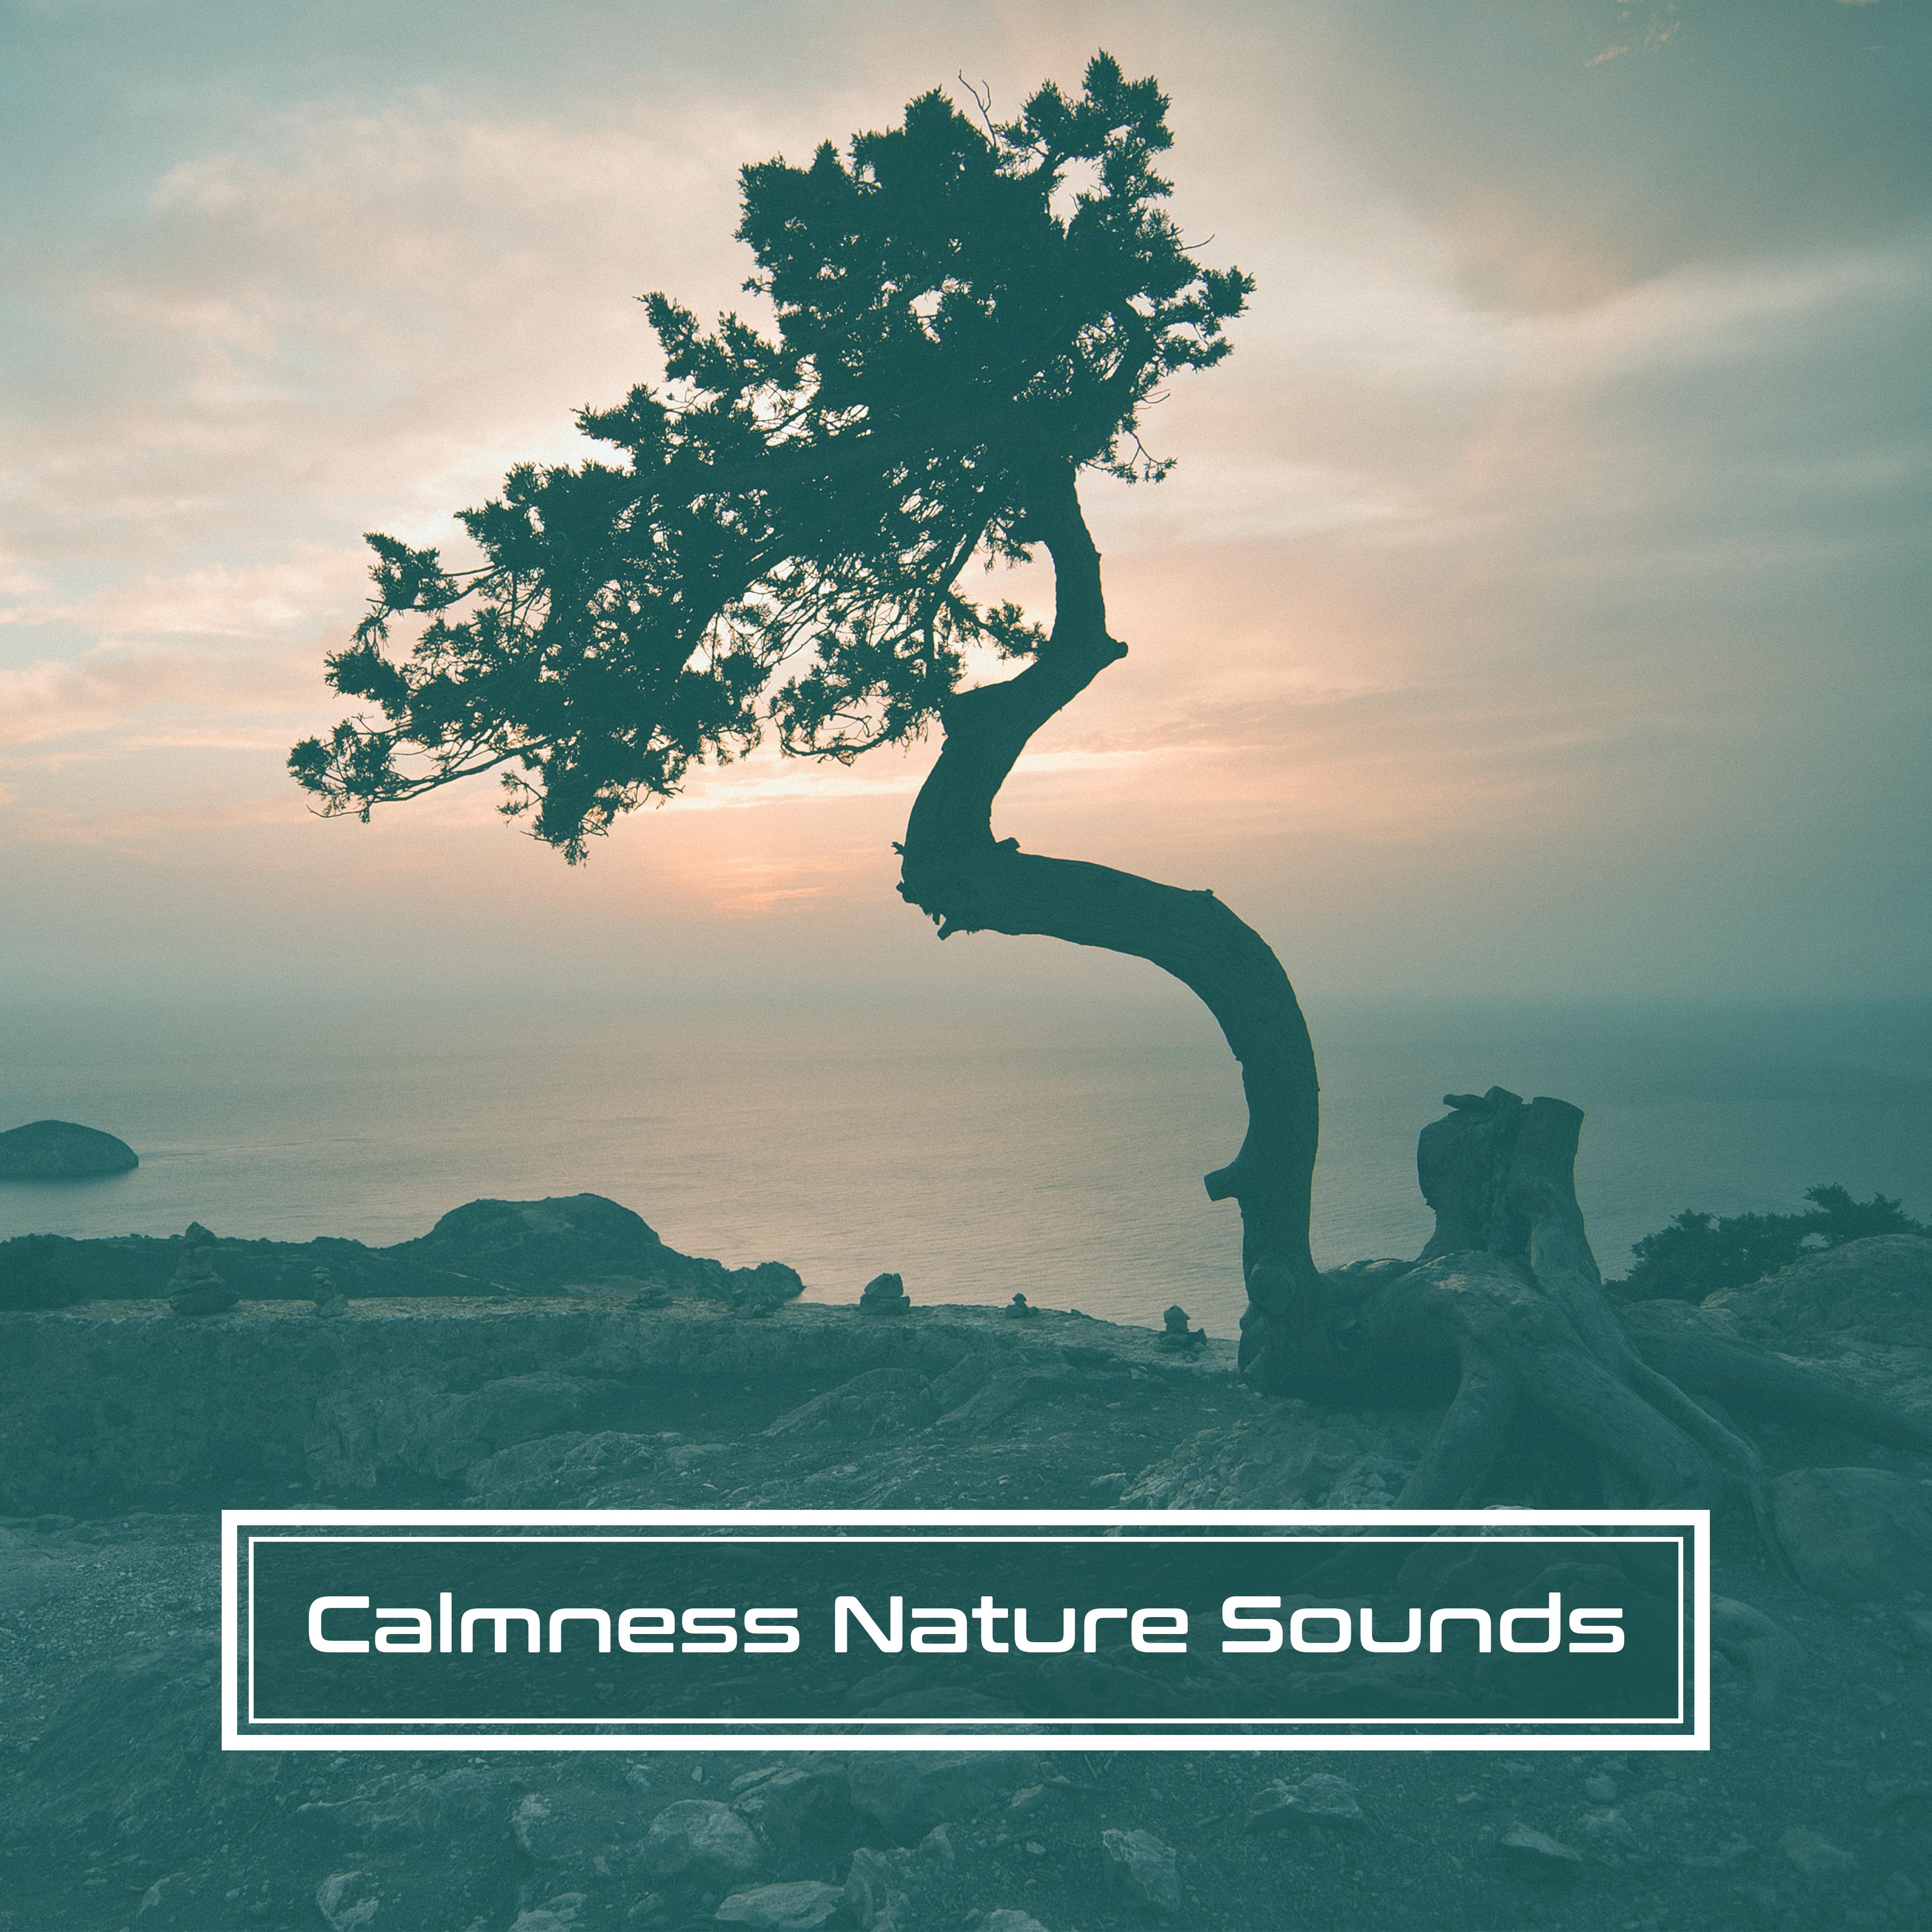 Calmness Nature Sounds  Music to Relax, Rest with New Age Sounds, Healing Waves, Soothing Wind Blows